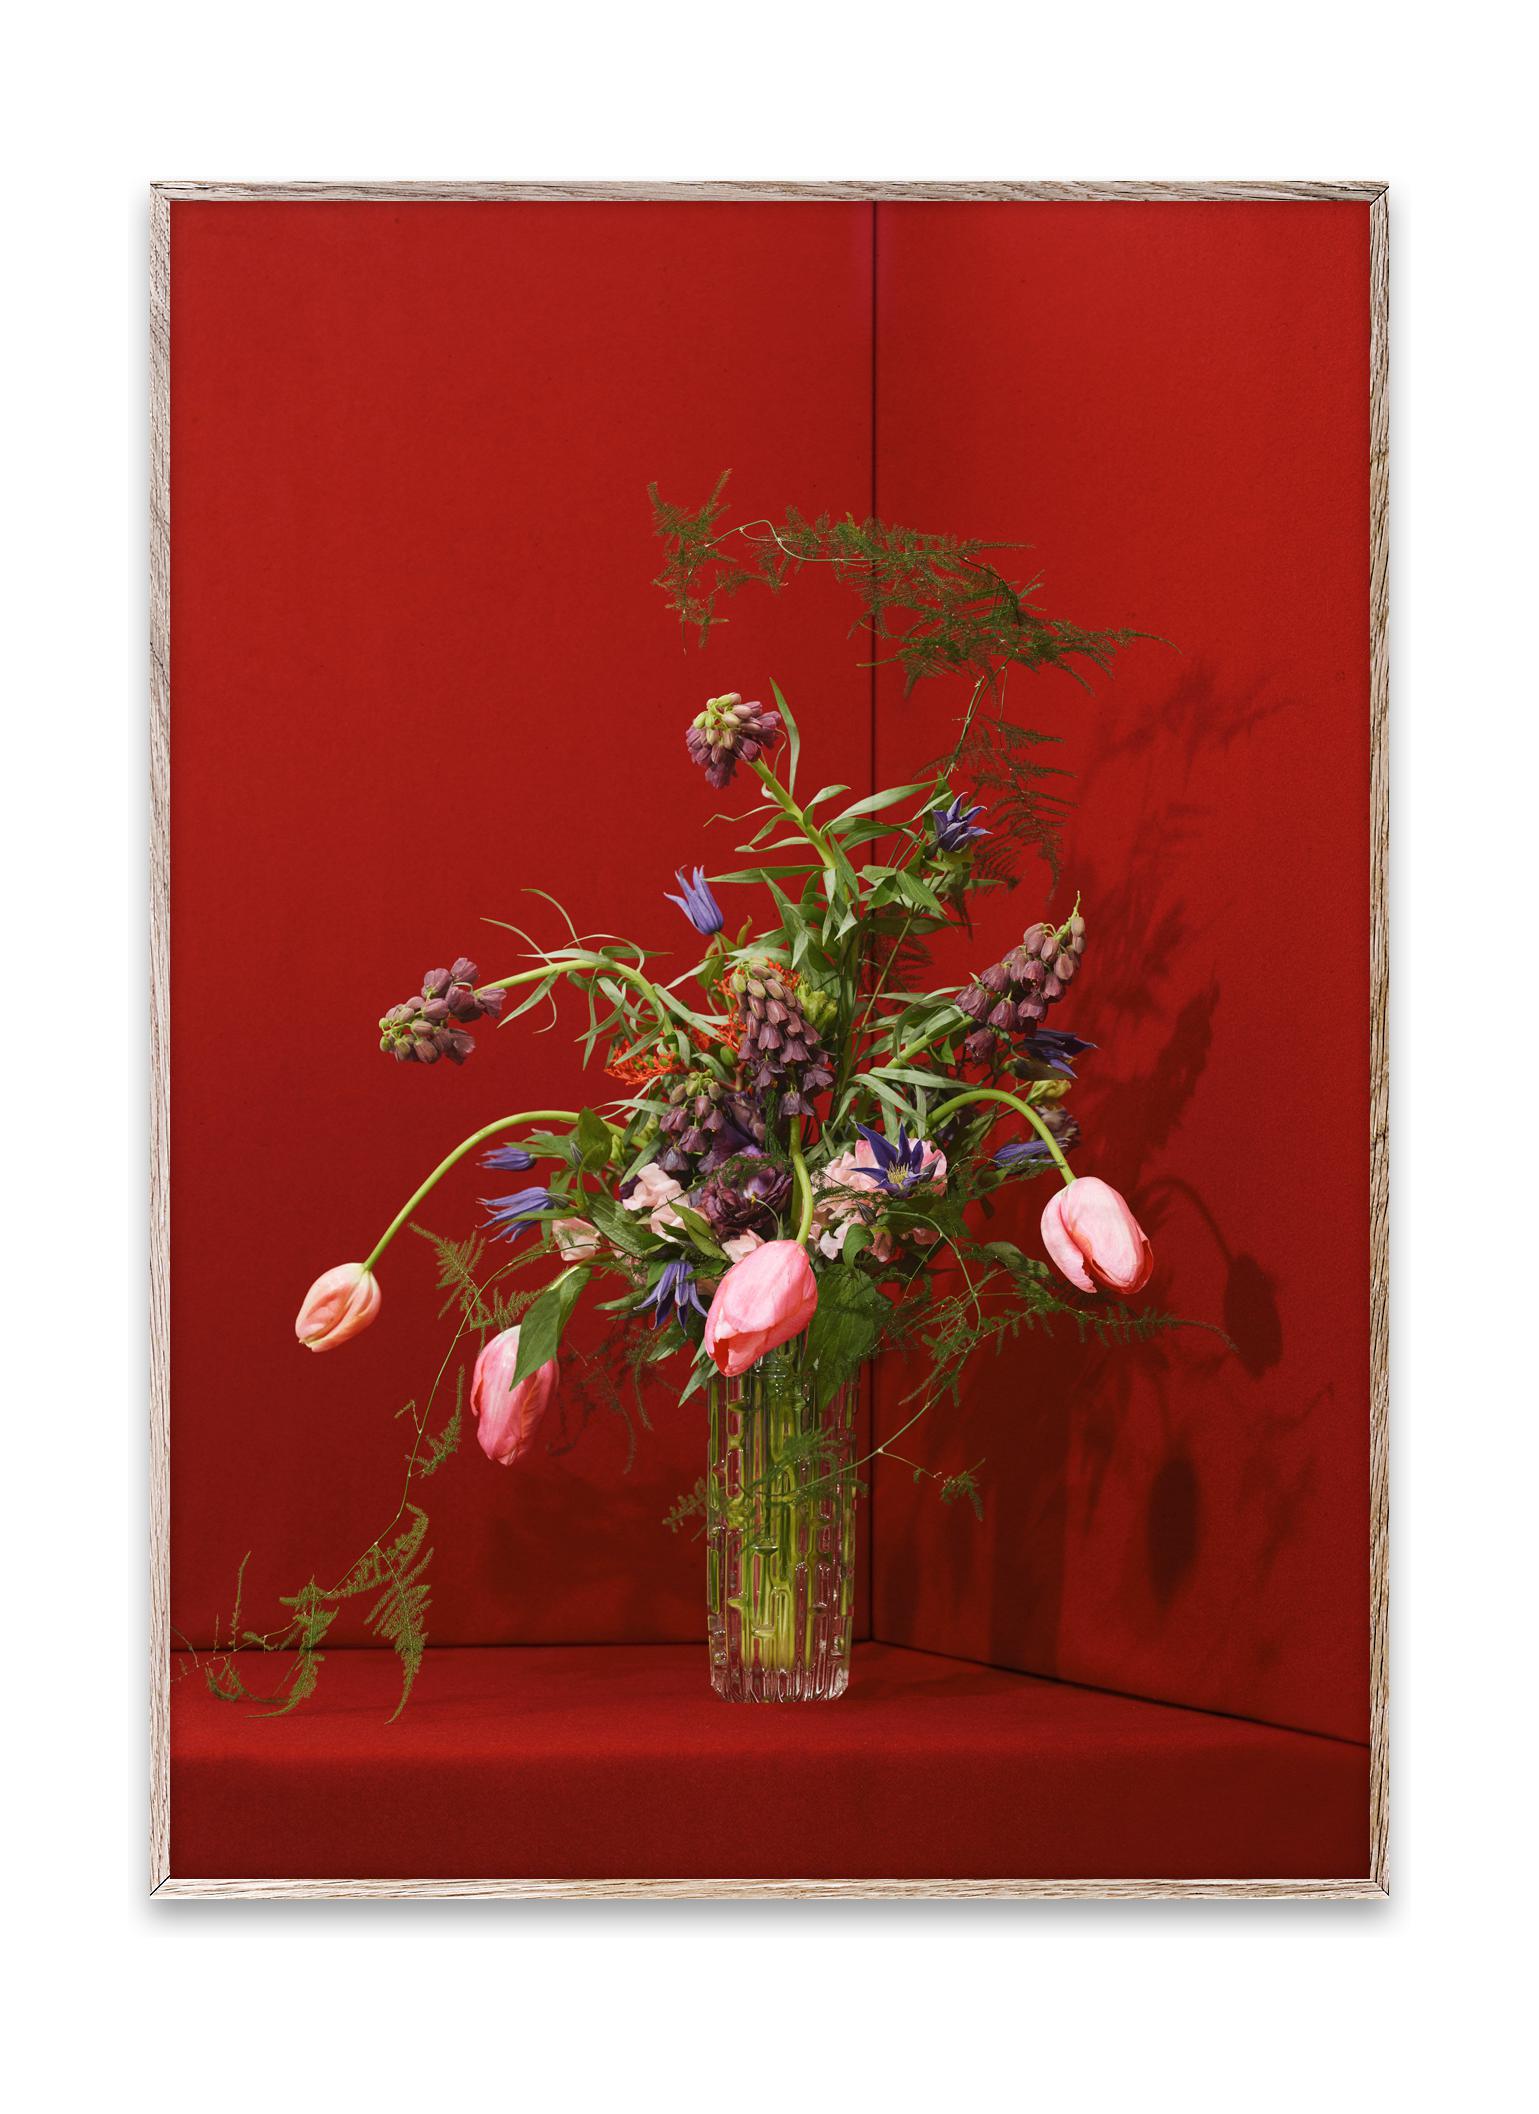 Paper Collective Blomst 03 Poster 30x40 cm, rood